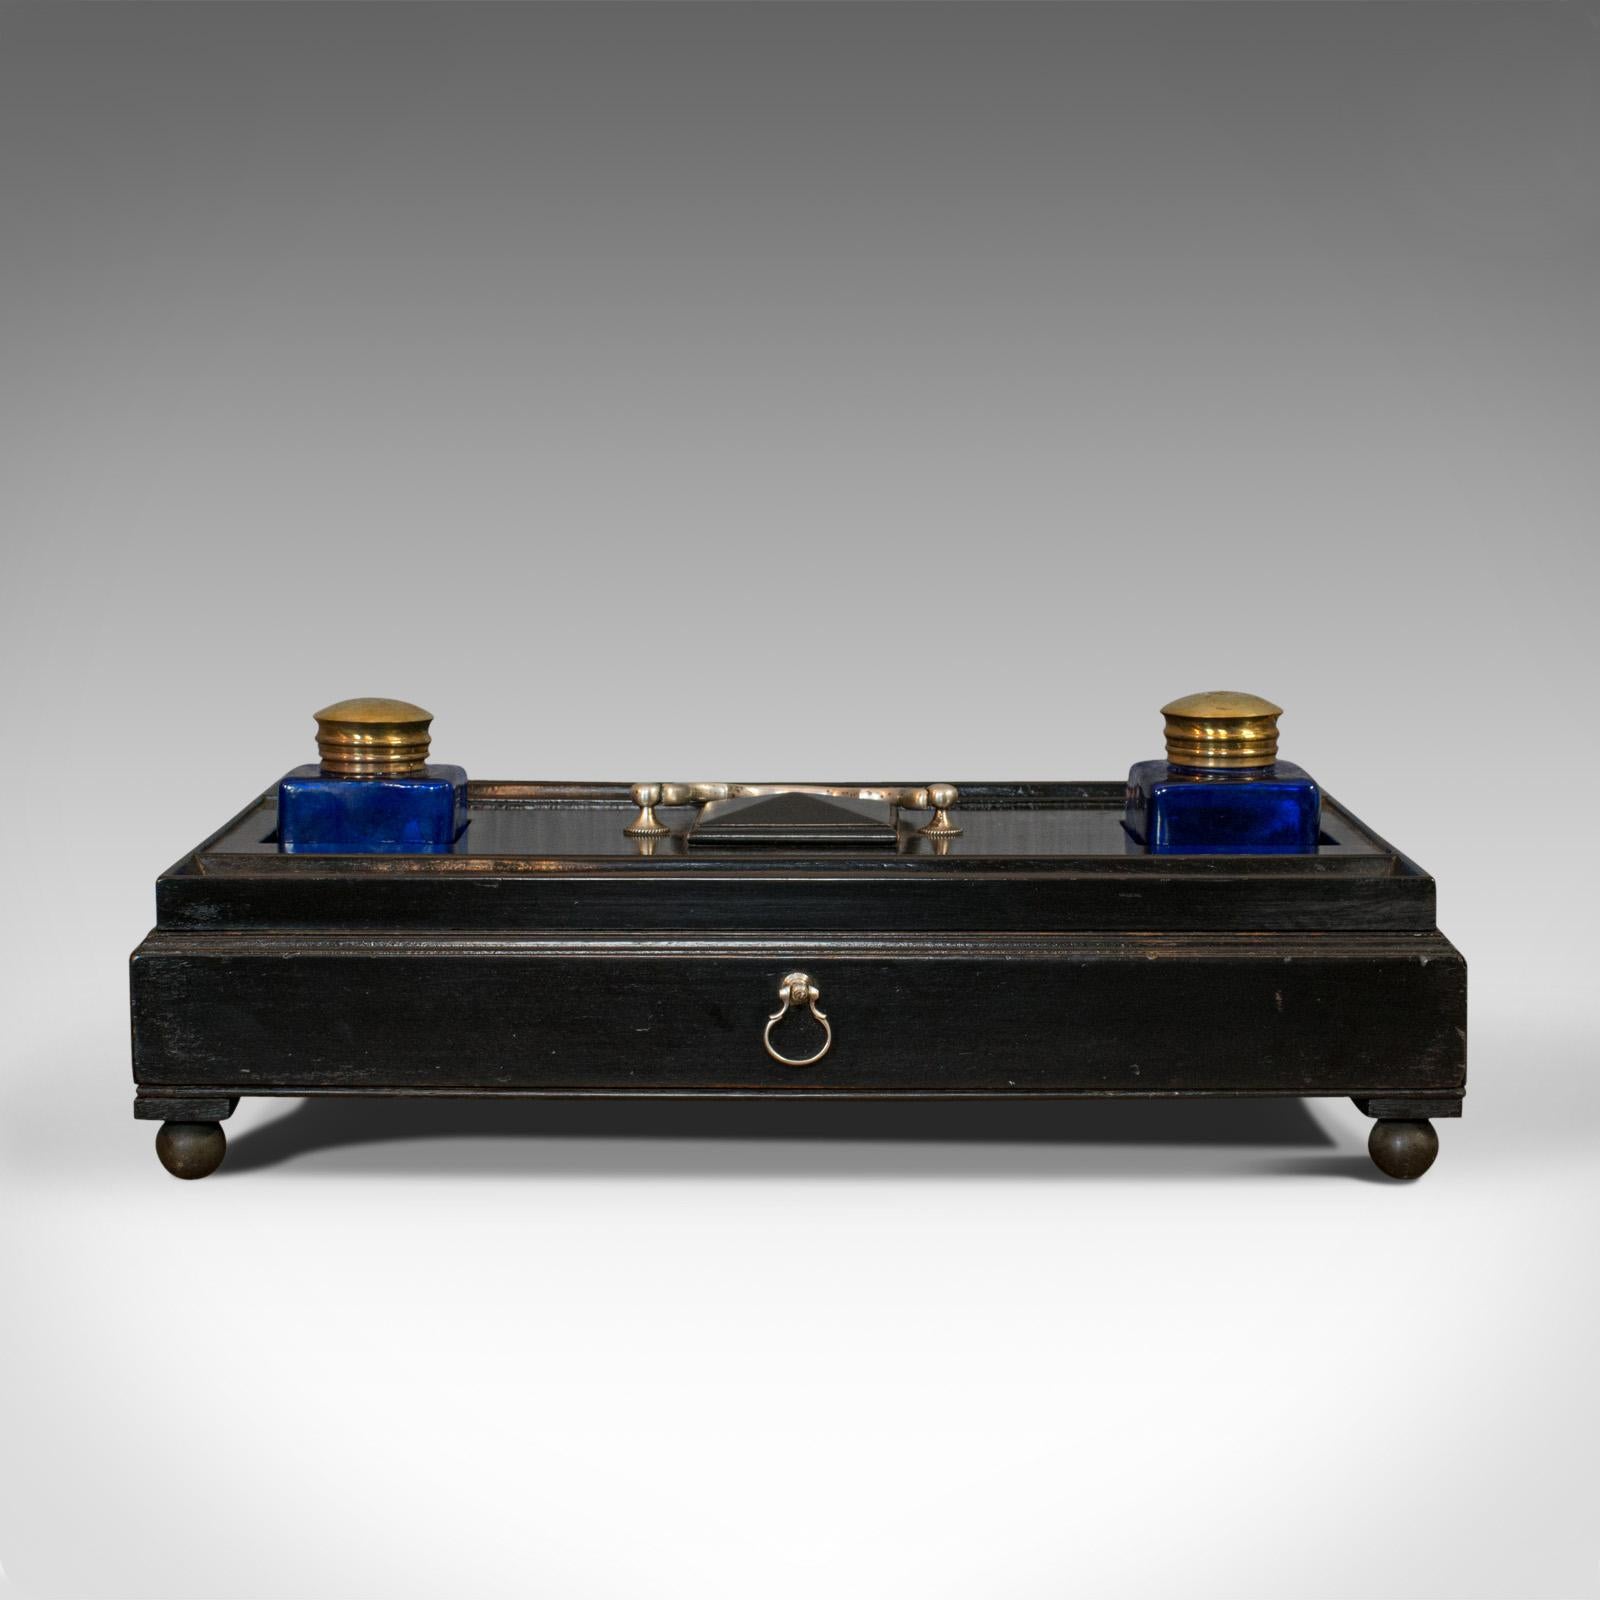 This is an antique double ink well. An English, ebonized mahogany desk tidy from the Aesthetic period, dating to the late 19th century, circa 1880.

Quality desk apparatus with dark tones
Displays a desirable aged patina
Ebonized mahogany with